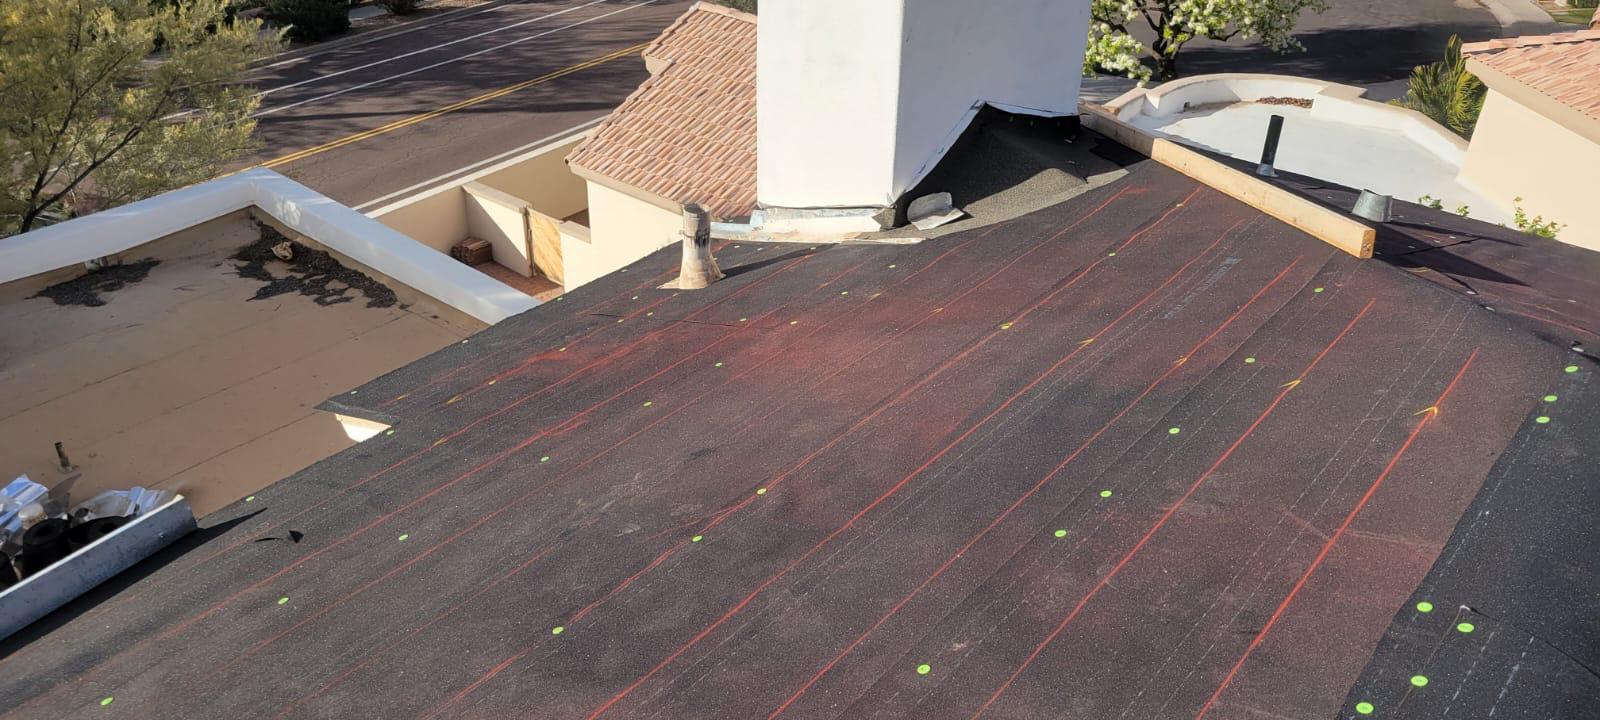 Behmer Roofing's commitment to excellence shown in the underlayment setup for a North Phoenix home's re-felt.